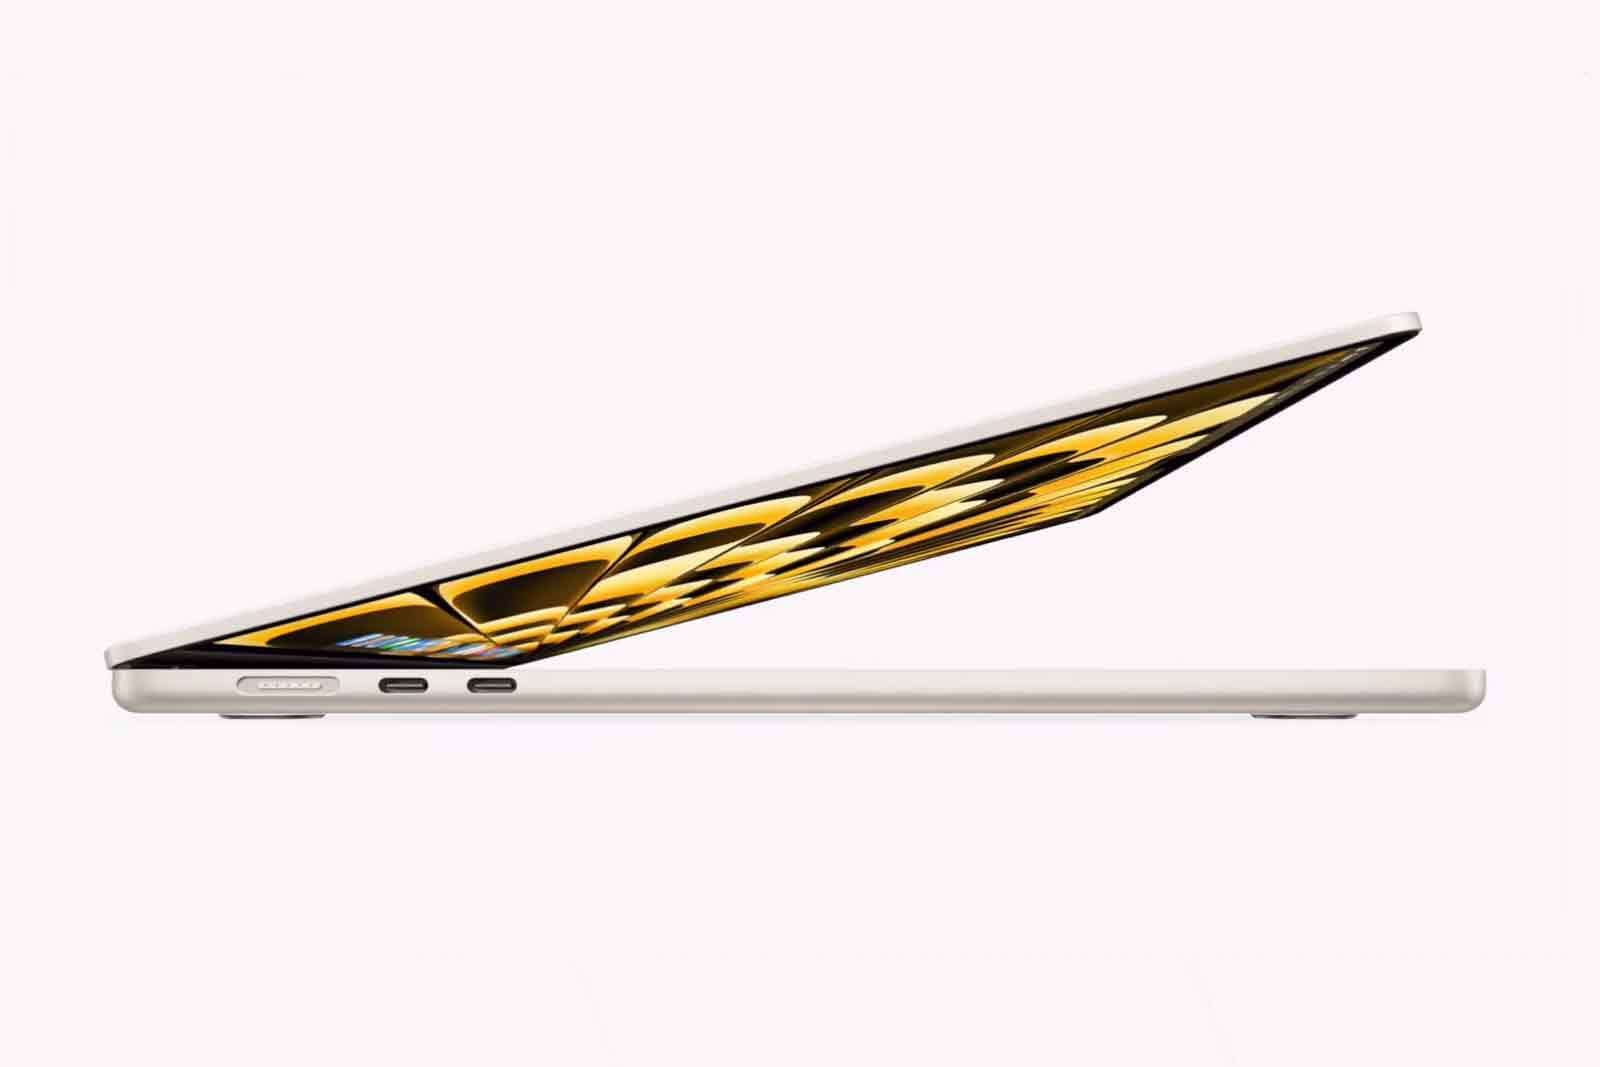 Apple MacBook Air is thinnest 15-inch laptop yet